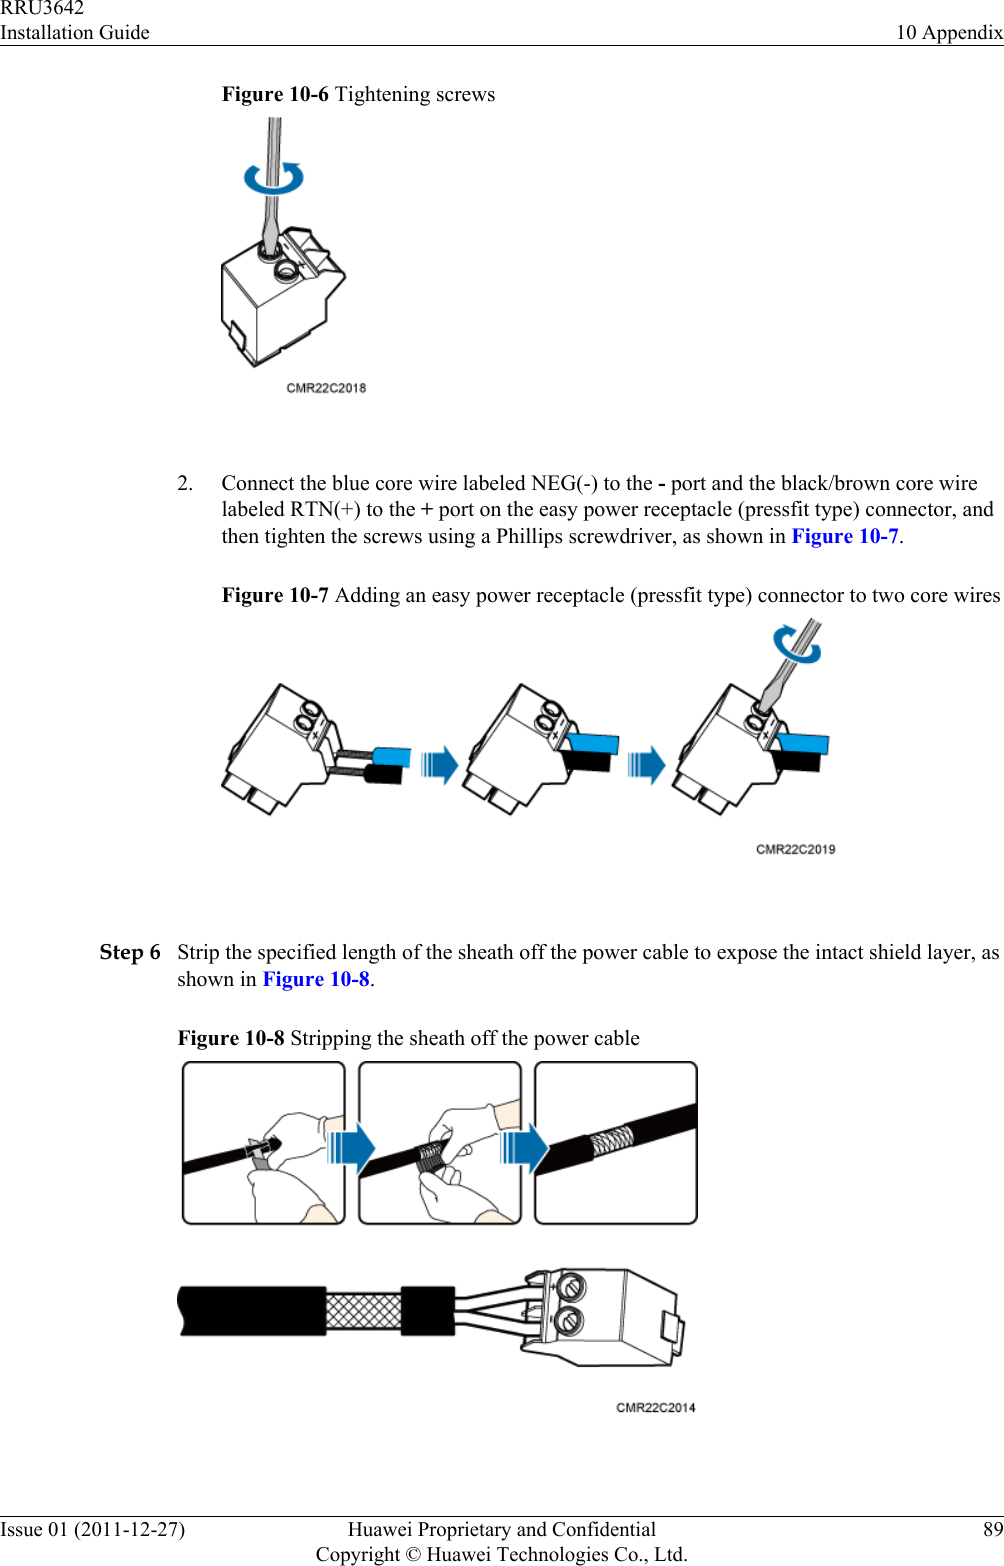 Figure 10-6 Tightening screws 2. Connect the blue core wire labeled NEG(-) to the - port and the black/brown core wirelabeled RTN(+) to the + port on the easy power receptacle (pressfit type) connector, andthen tighten the screws using a Phillips screwdriver, as shown in Figure 10-7.Figure 10-7 Adding an easy power receptacle (pressfit type) connector to two core wires Step 6 Strip the specified length of the sheath off the power cable to expose the intact shield layer, asshown in Figure 10-8.Figure 10-8 Stripping the sheath off the power cable RRU3642Installation Guide 10 AppendixIssue 01 (2011-12-27) Huawei Proprietary and ConfidentialCopyright © Huawei Technologies Co., Ltd.89